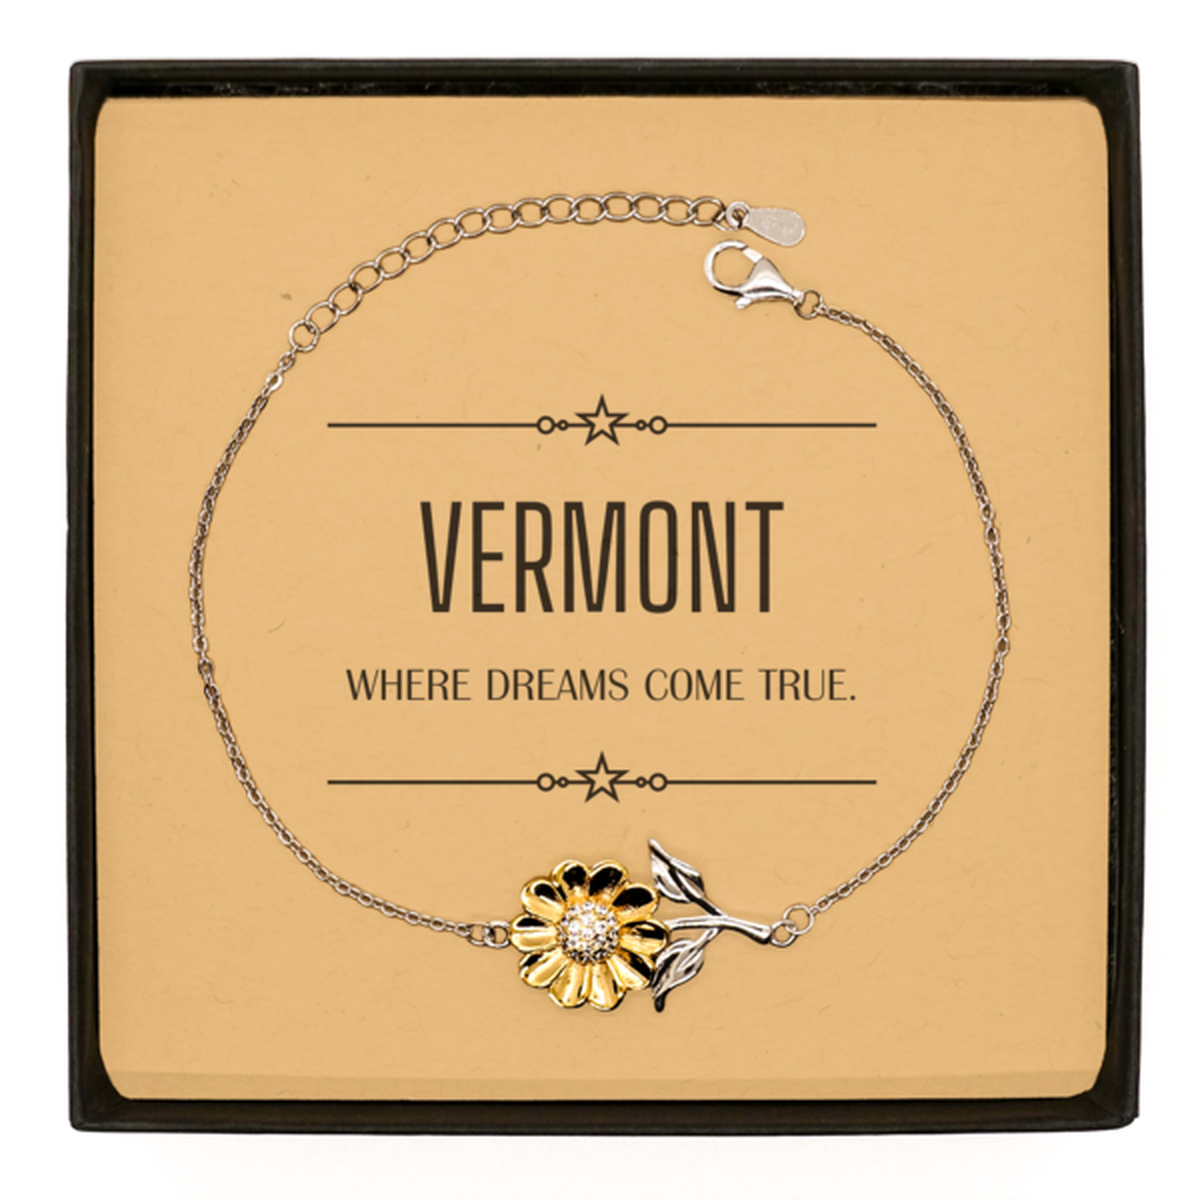 Love Vermont State Sunflower Bracelet, Vermont Where dreams come true, Birthday Inspirational Gifts For Vermont Men, Women, Friends